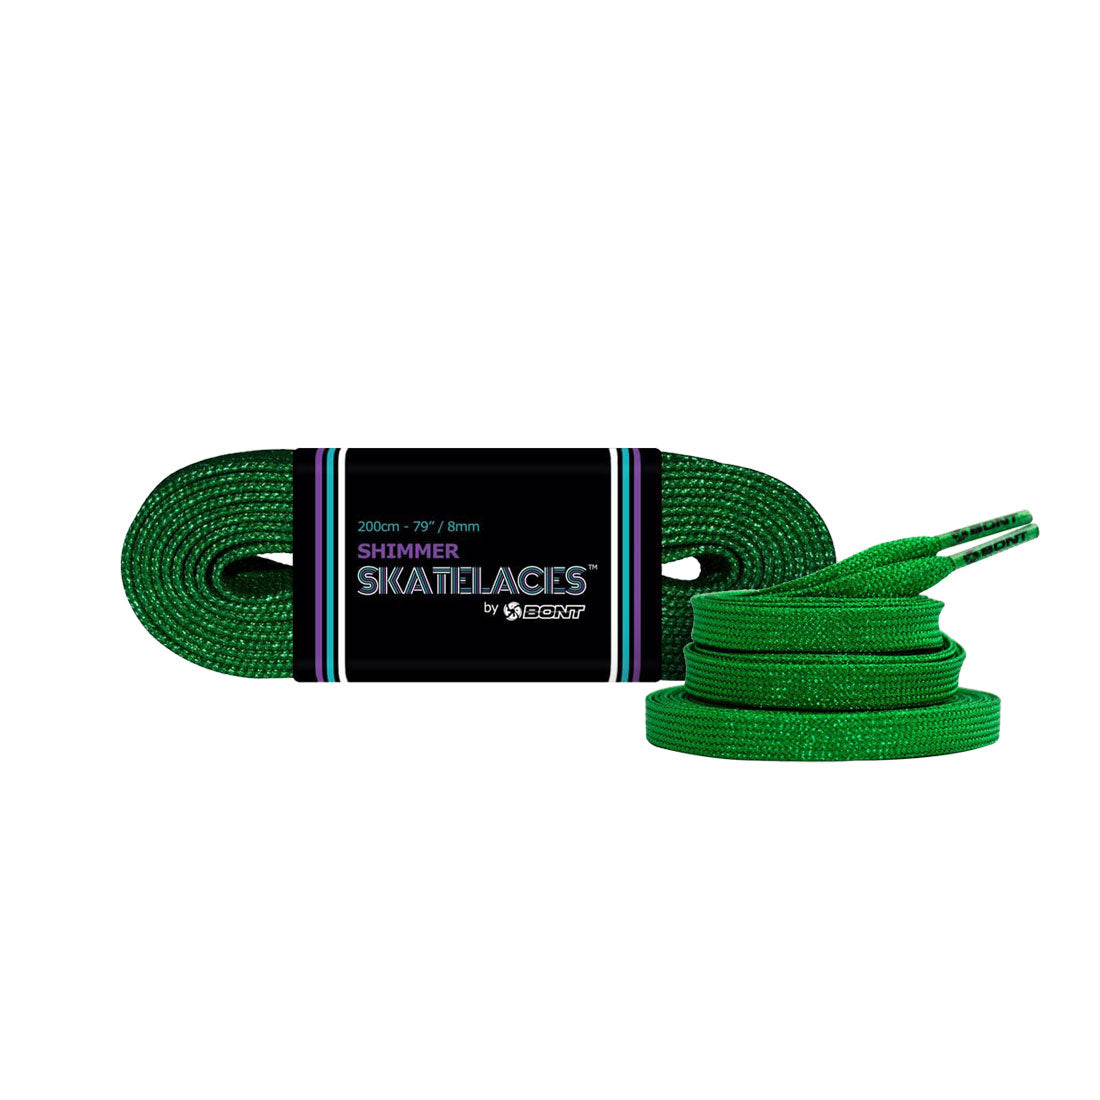 Bont Shimmer 8mm Laces - 245cm/96in Tinkerbell Green Laces